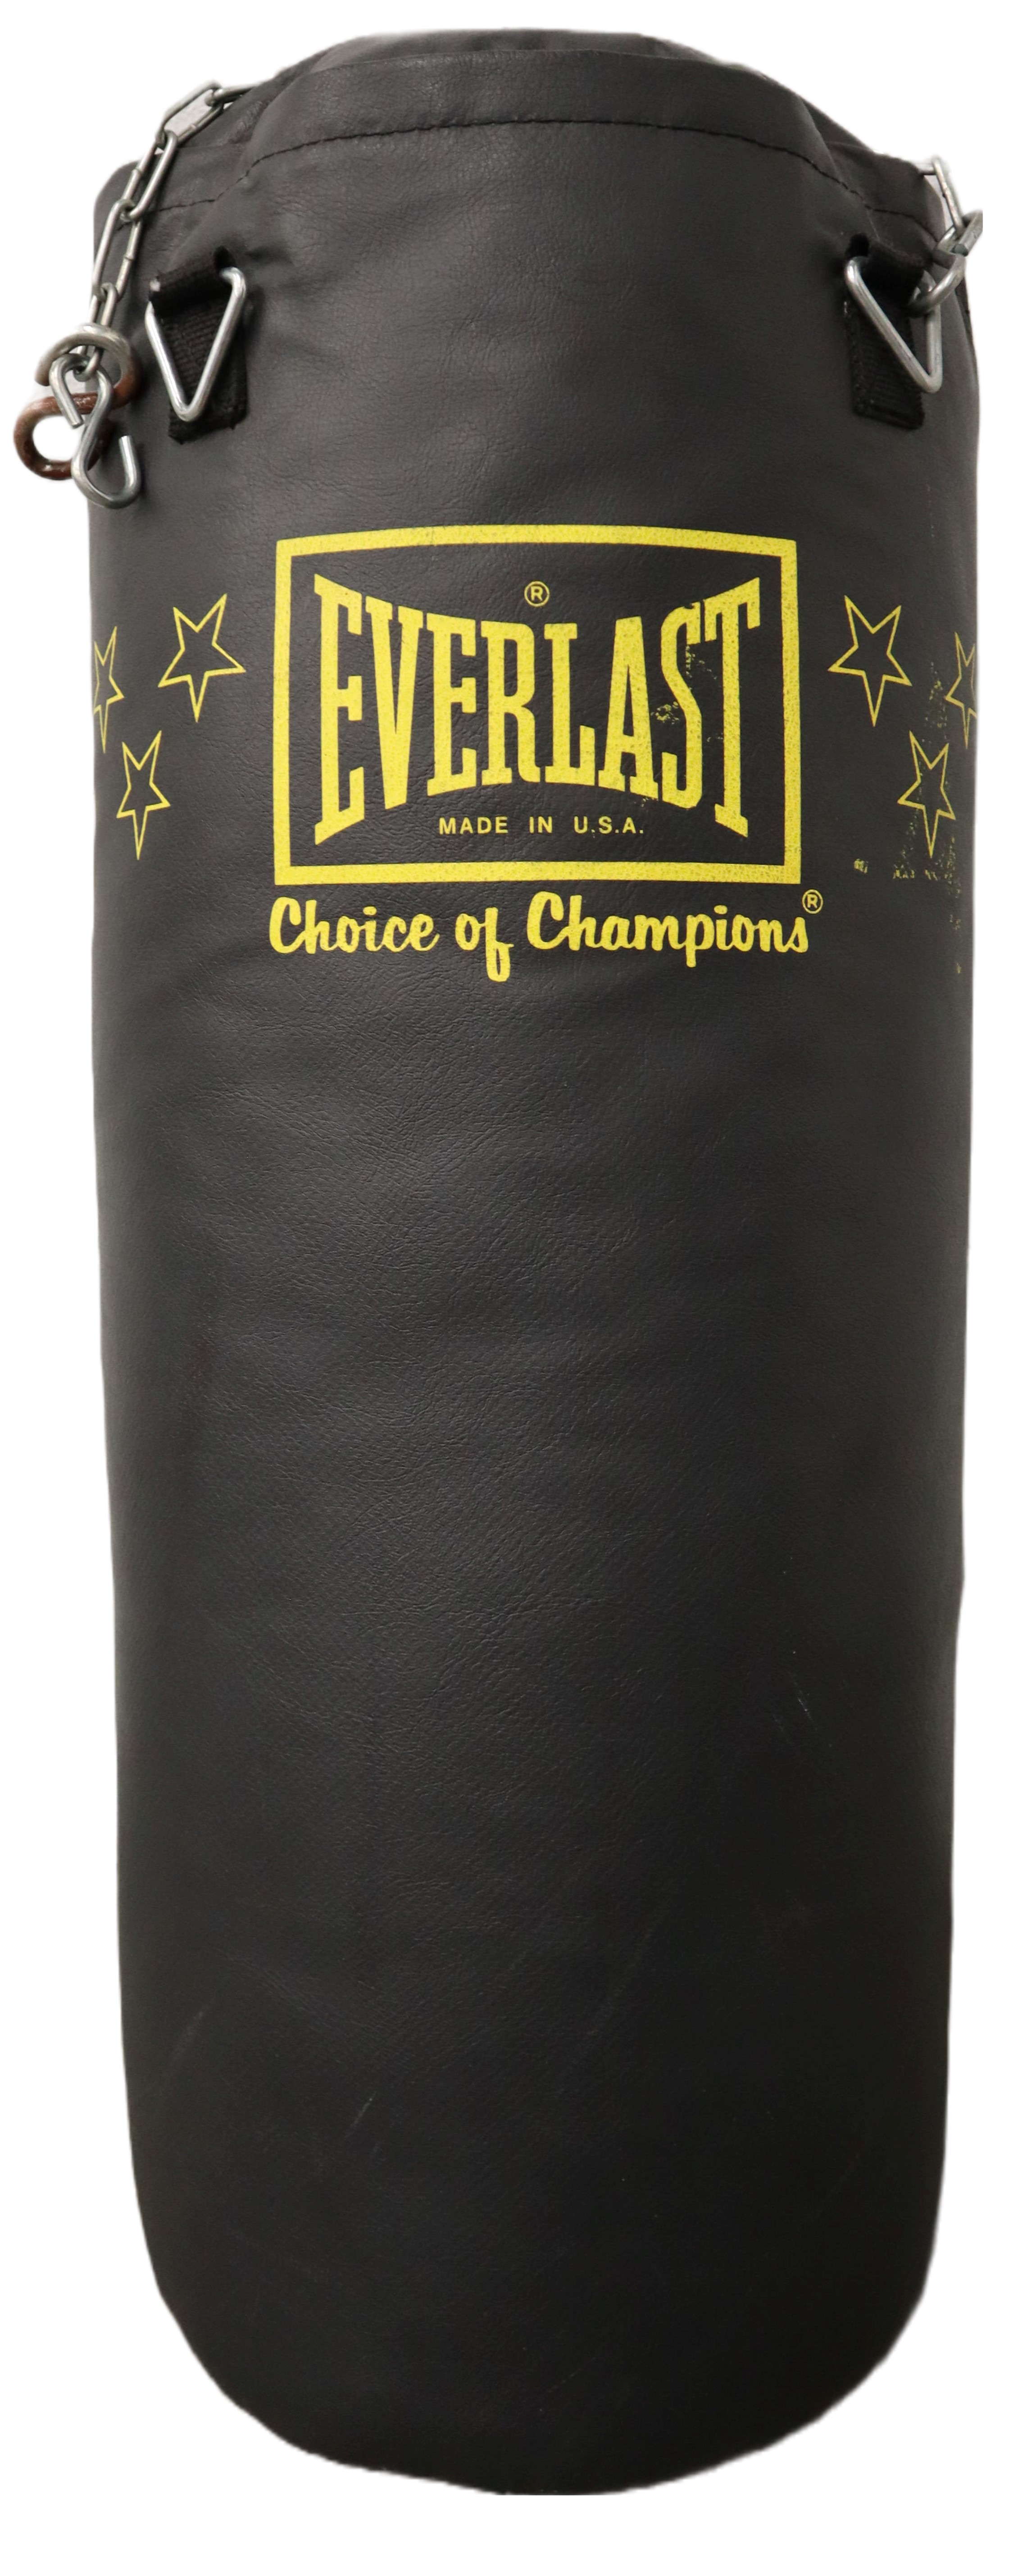 Used Everlast Choice of Champions Punching Bag Freeweights & Accessories